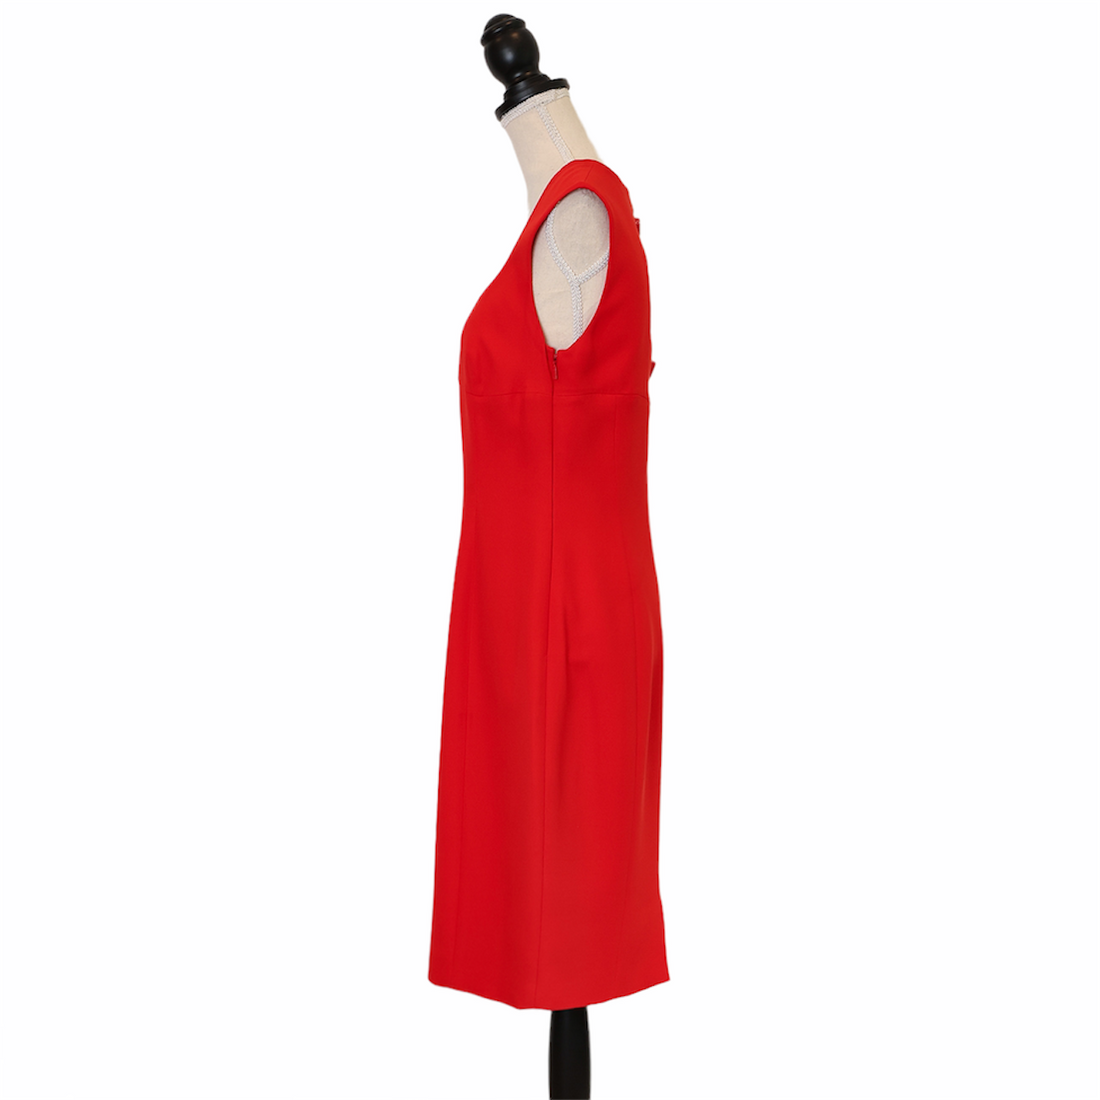 Versace sleeveless cocktail dress with a sixties look